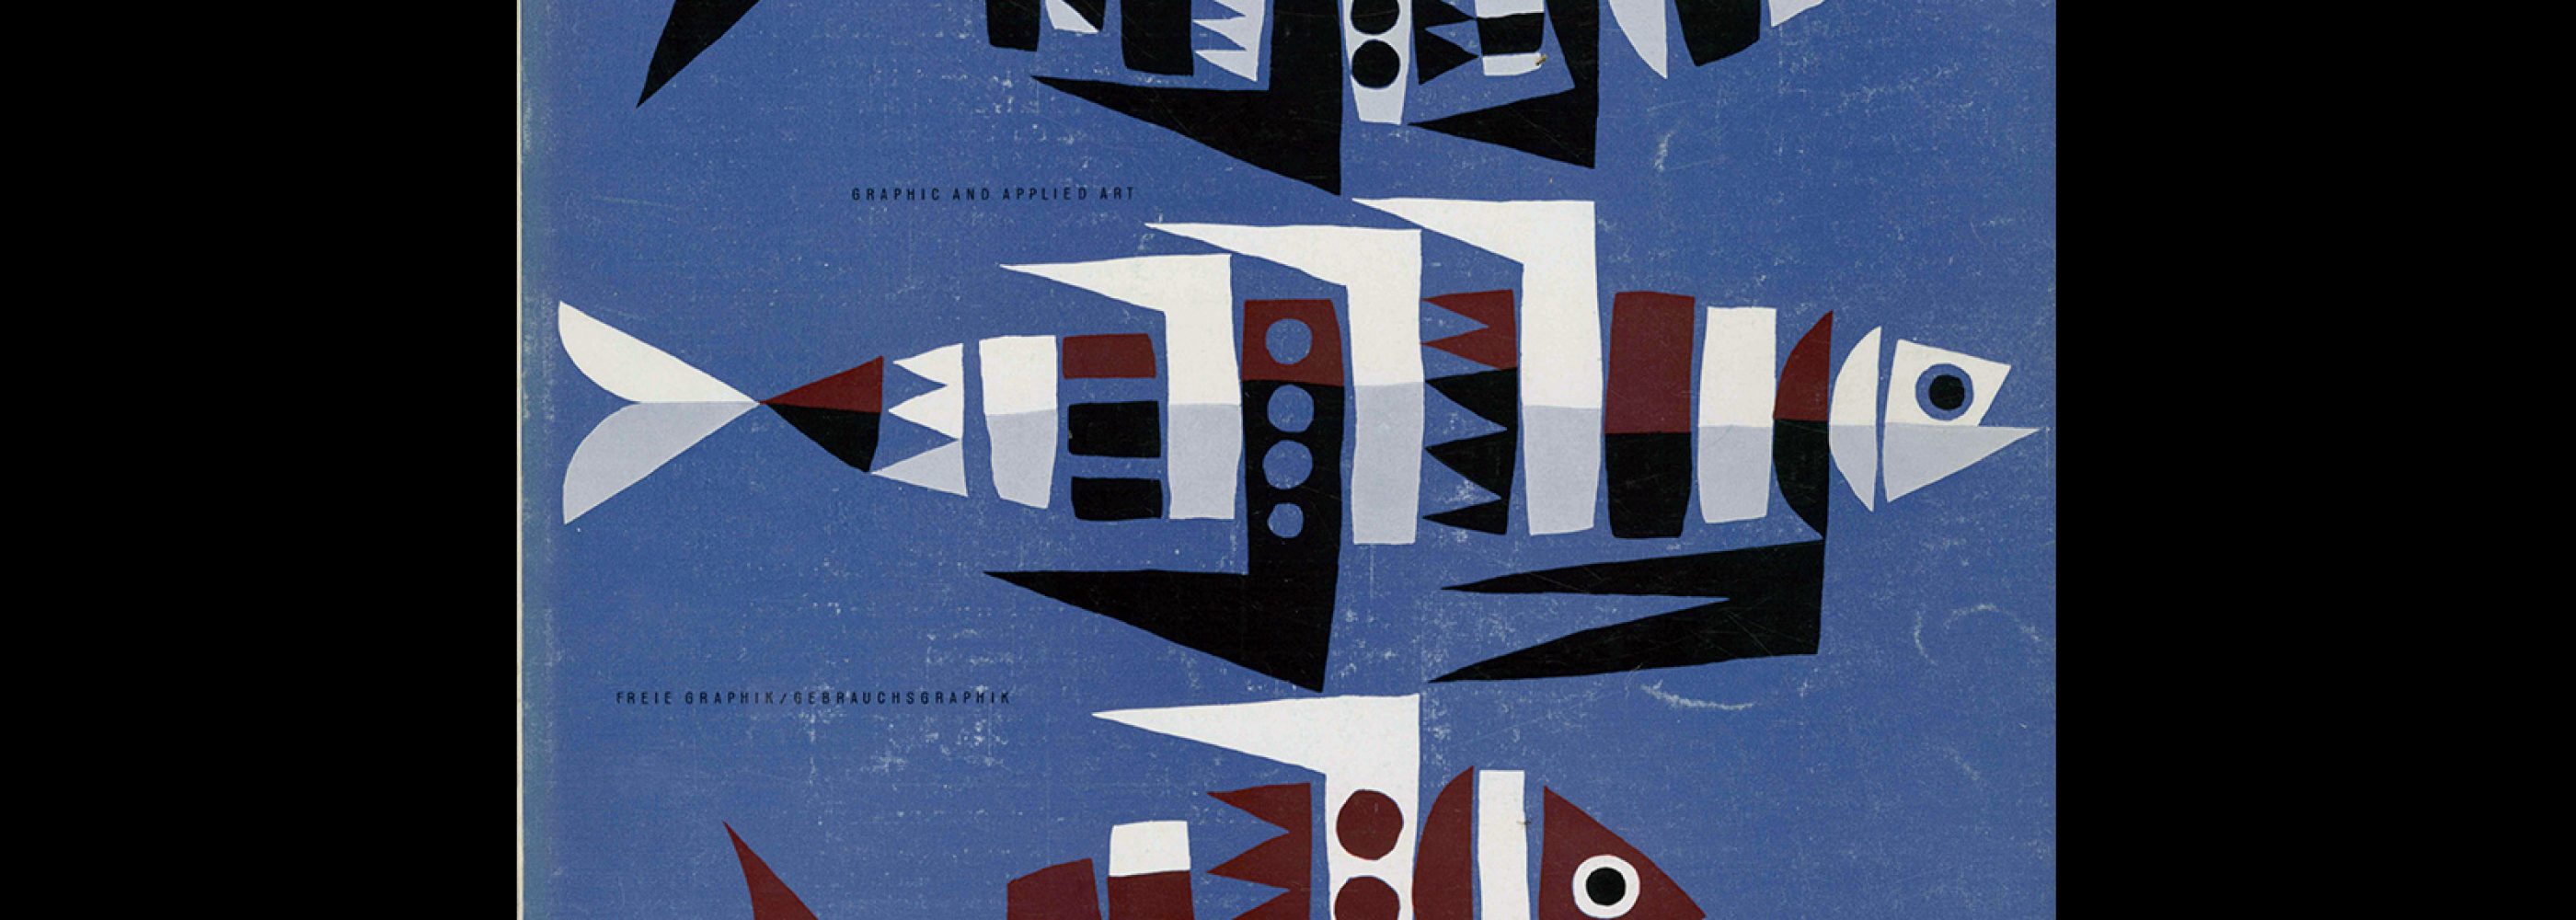 Graphis 49, 1953. Cover design by Hans Hartmann